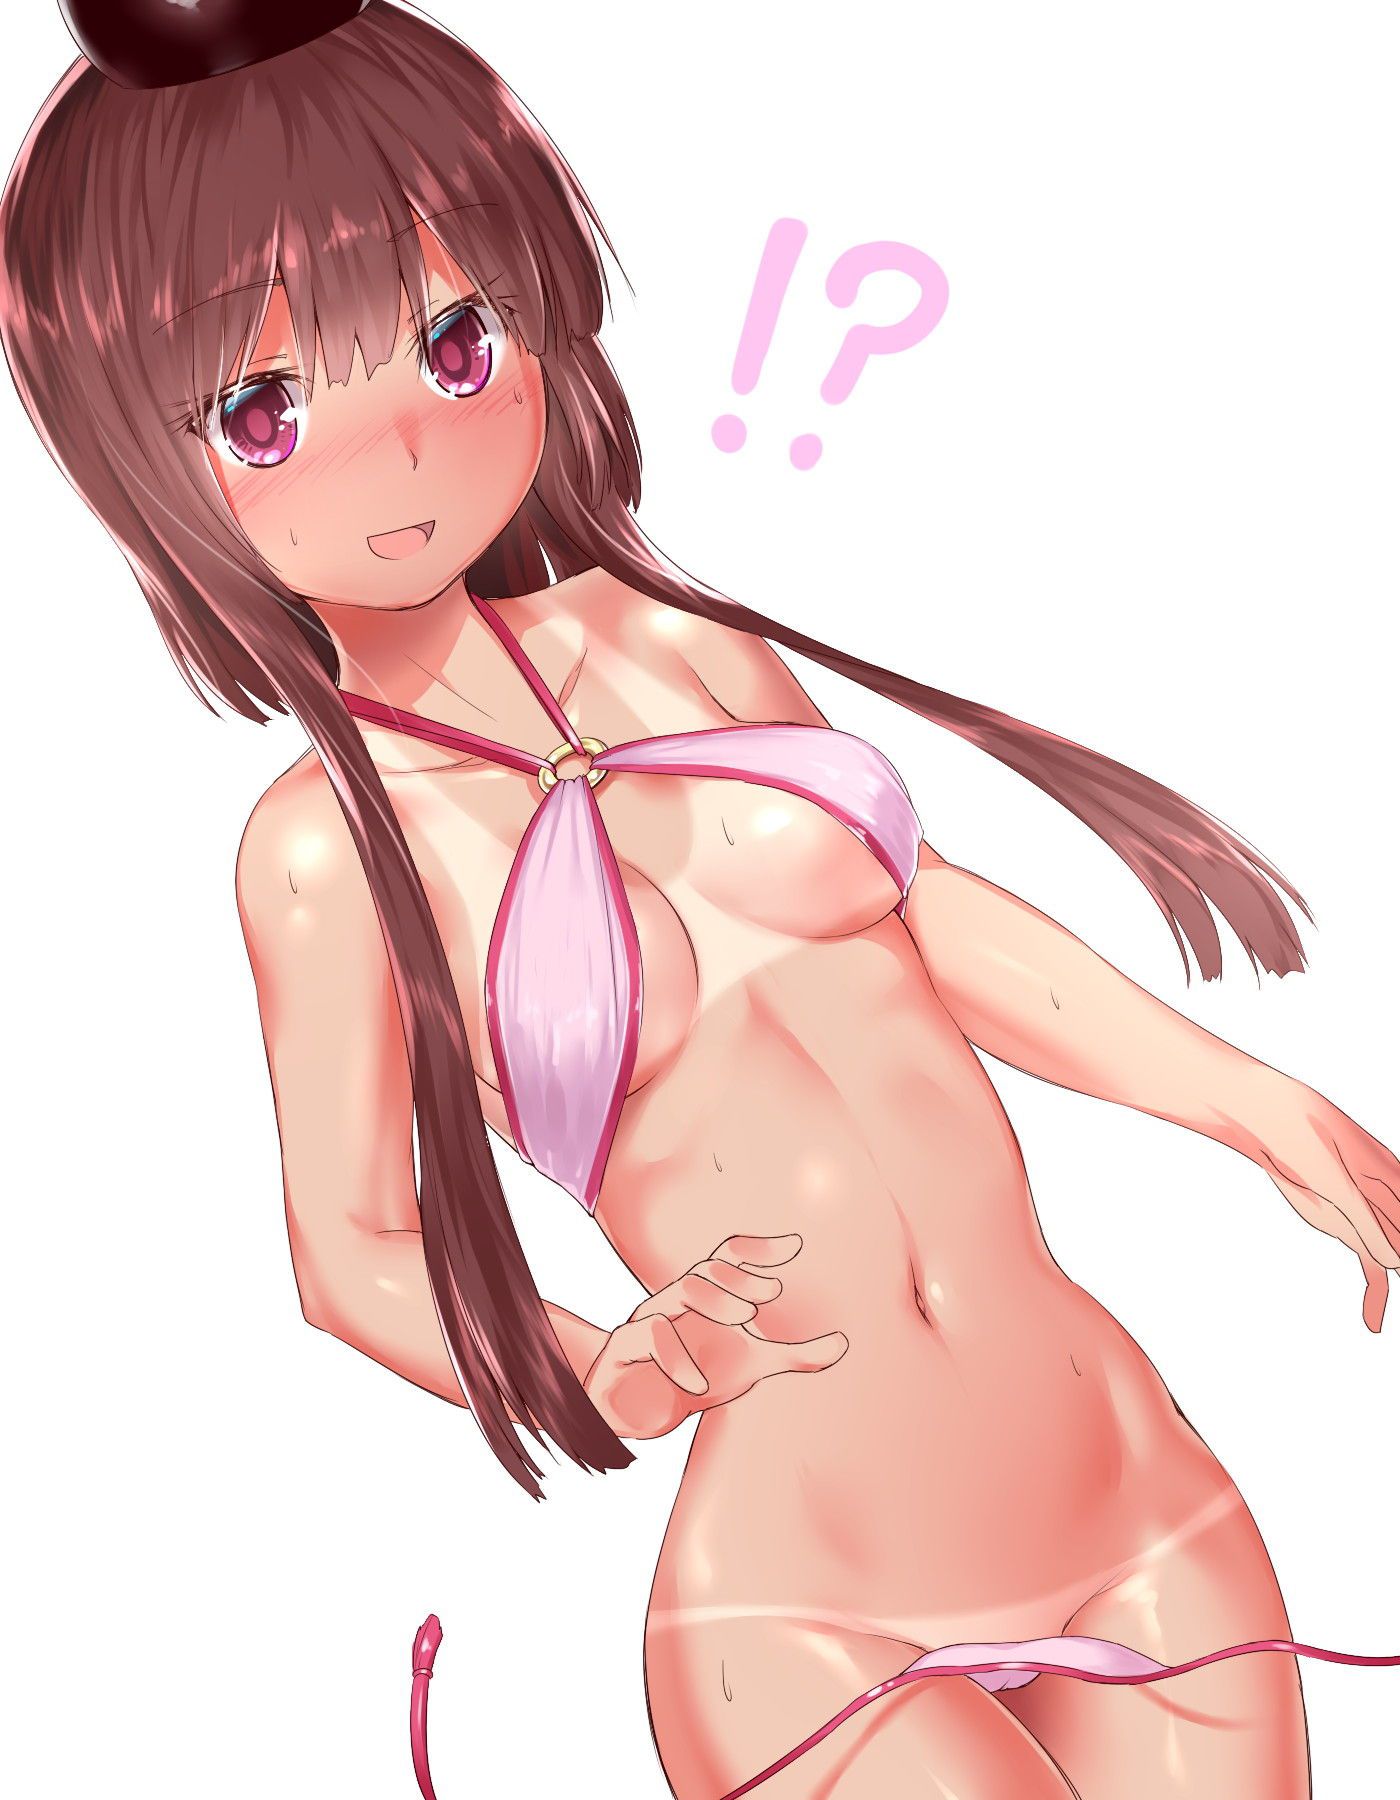 Please erotic images of swimsuits 1